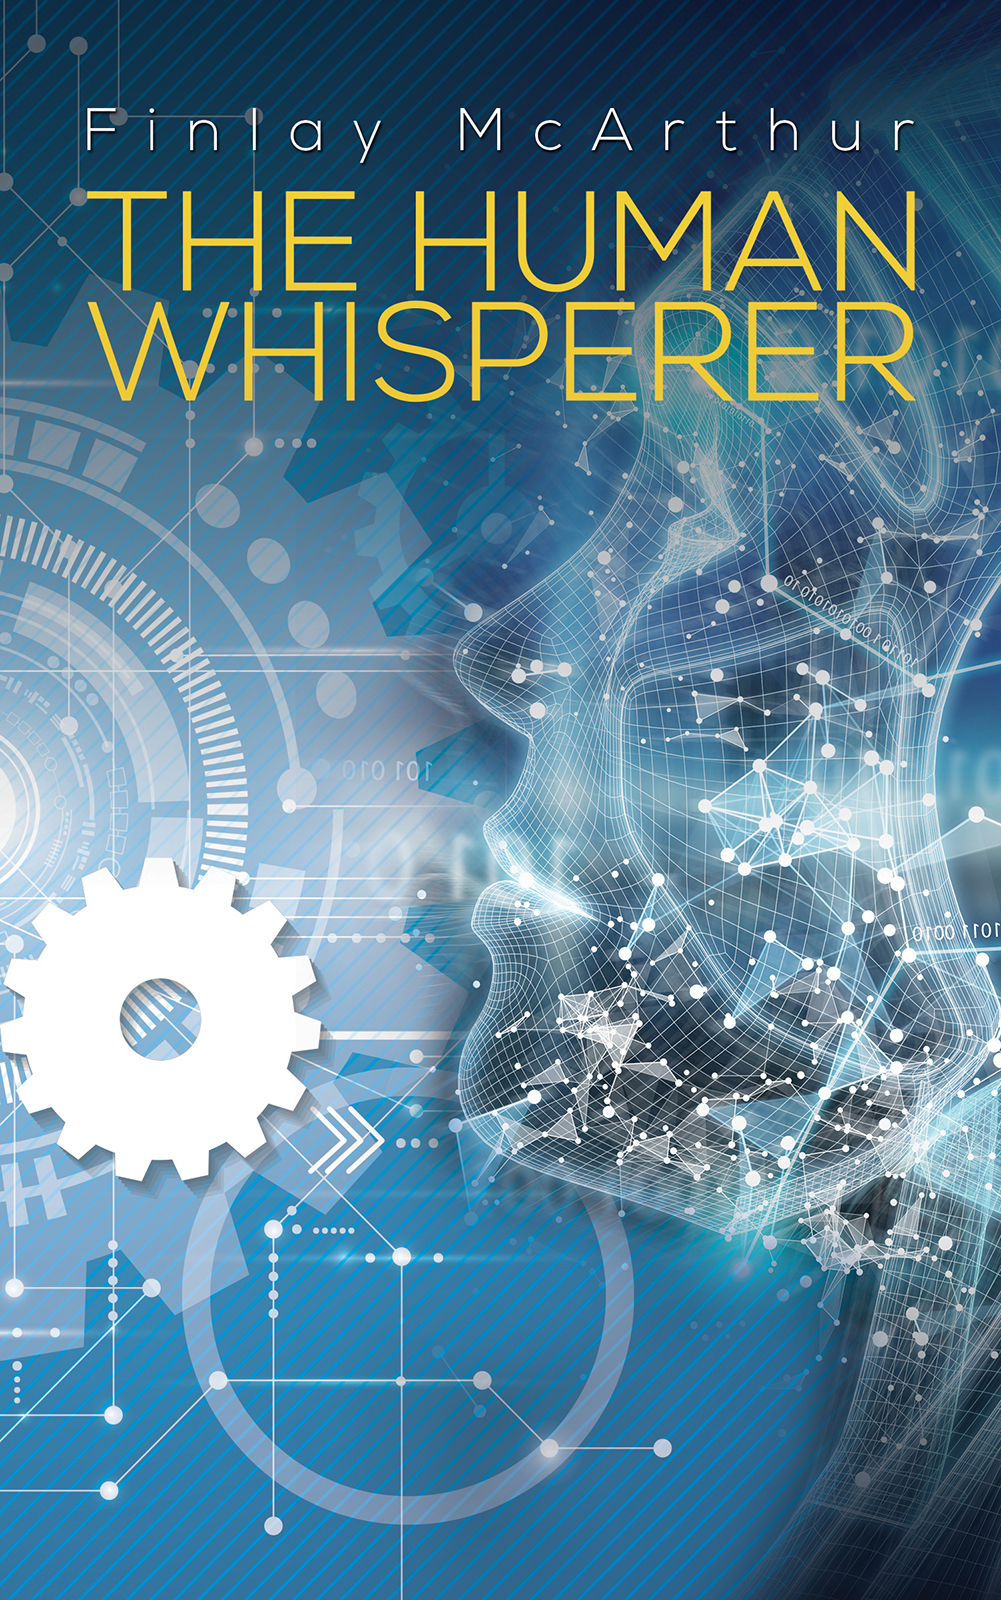 This image is the cover for the book The Human Whisperer